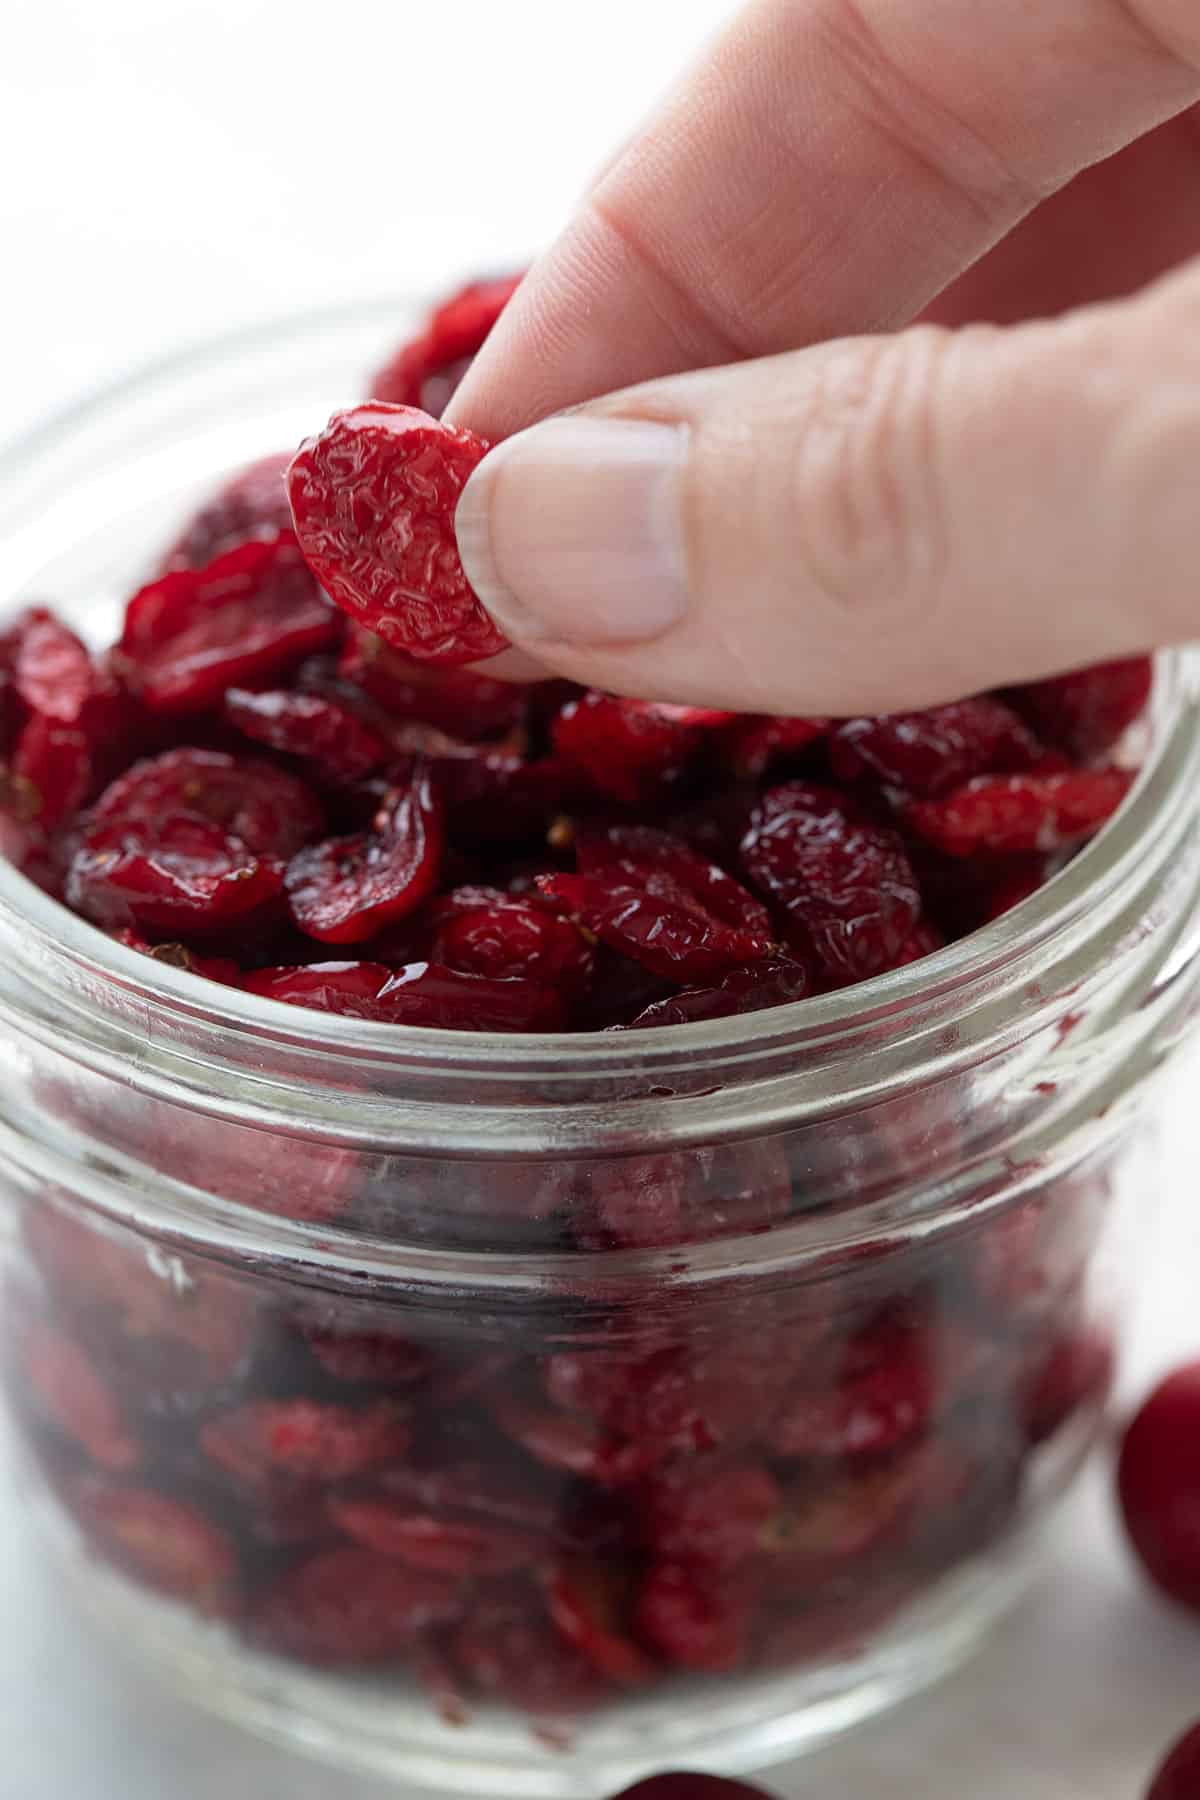 A hand holding up a homemade dried cranberry above the jar.